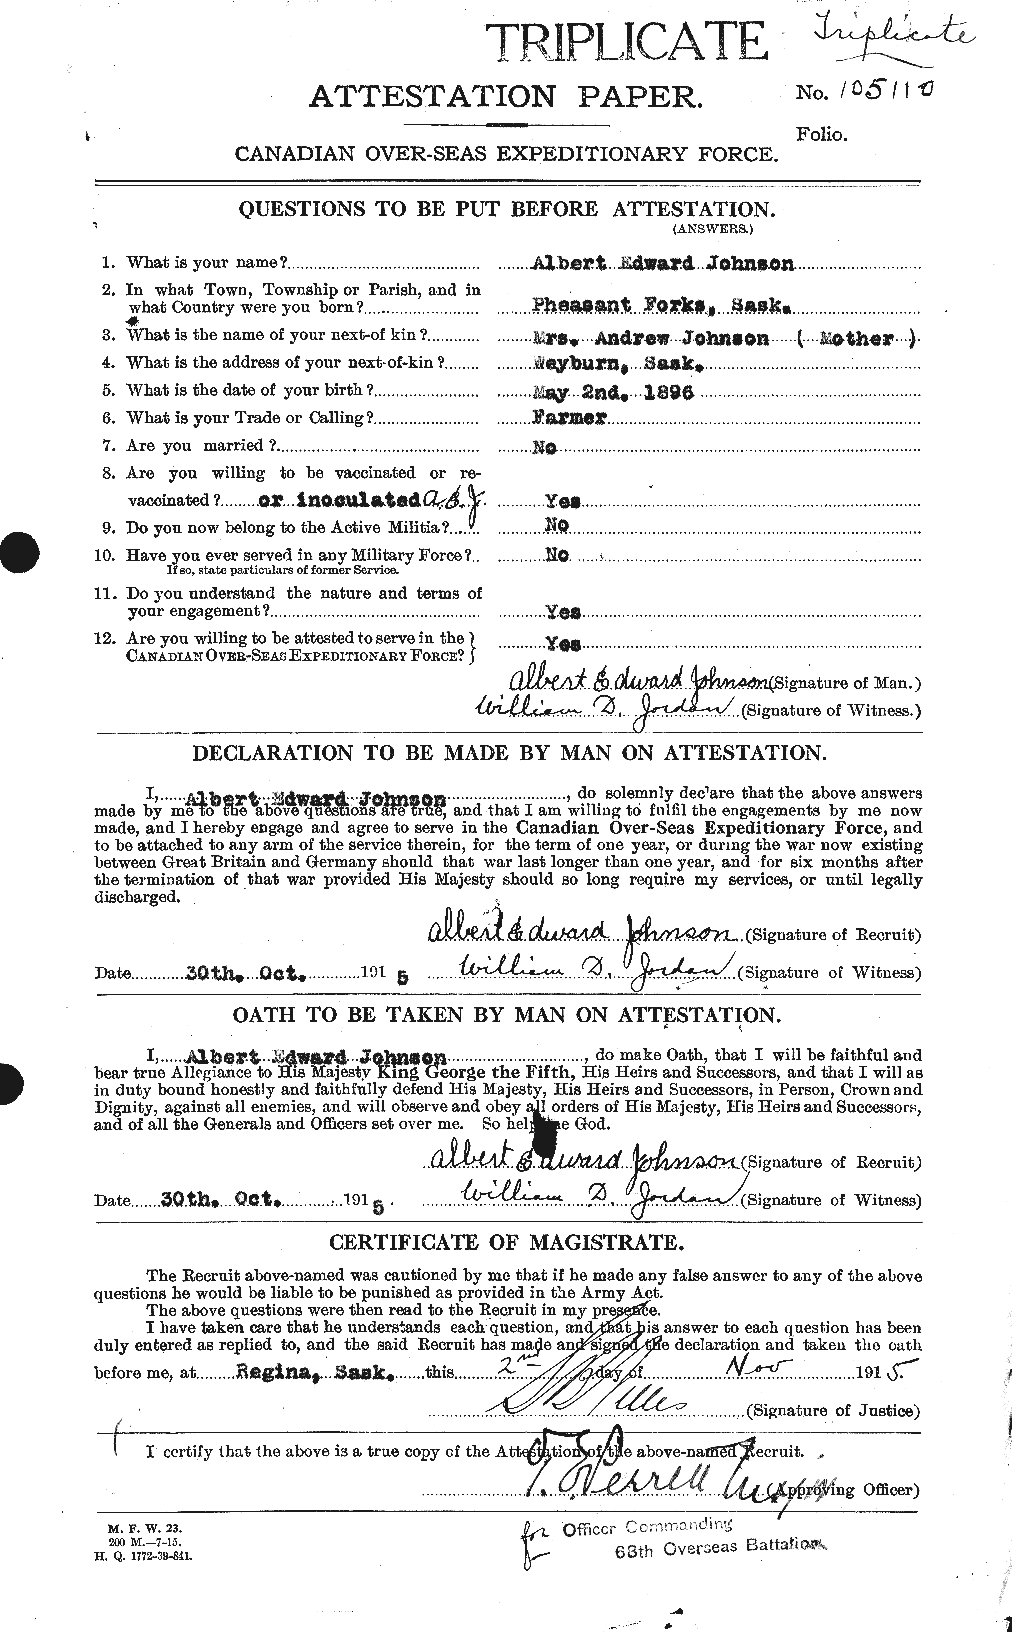 Personnel Records of the First World War - CEF 421124a